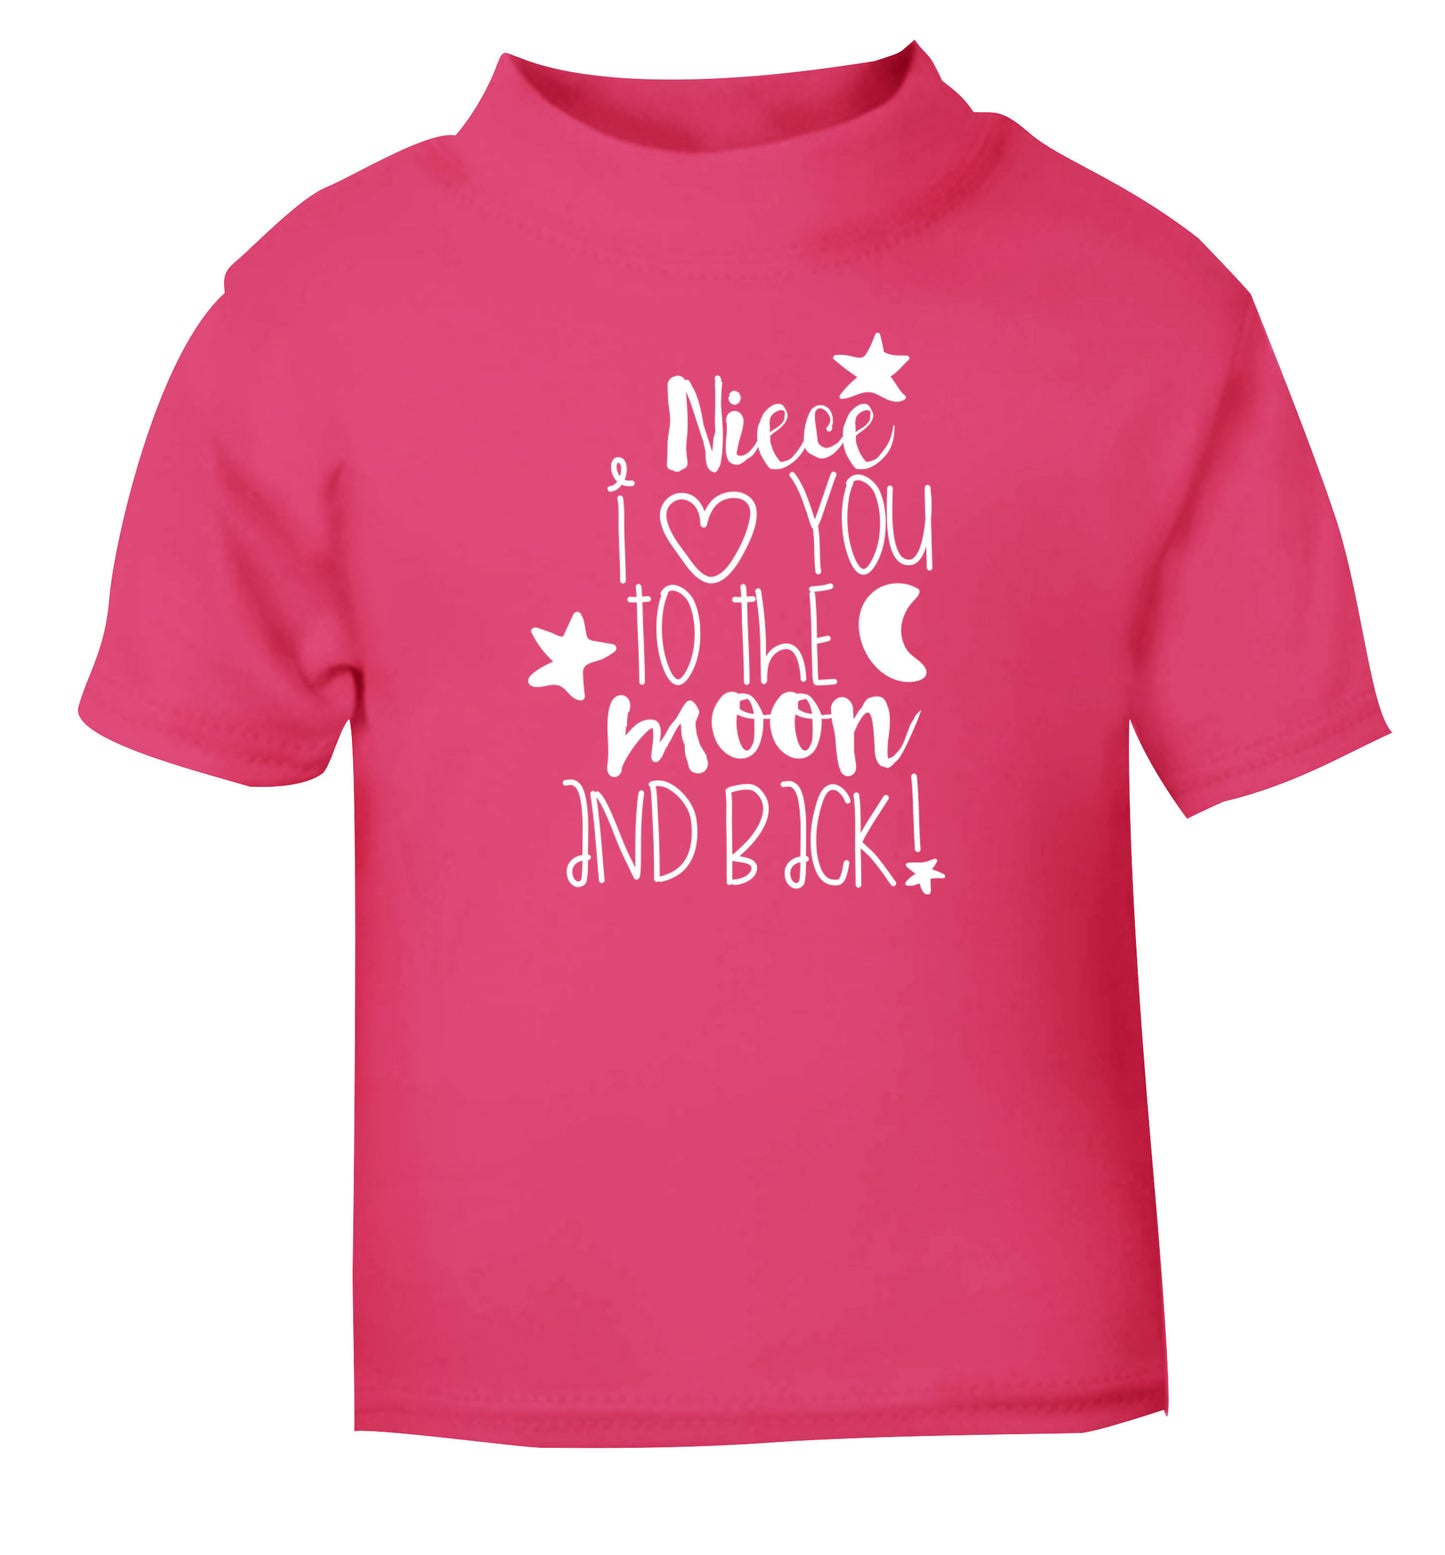 Niece I love you to the moon and back pink Baby Toddler Tshirt 2 Years